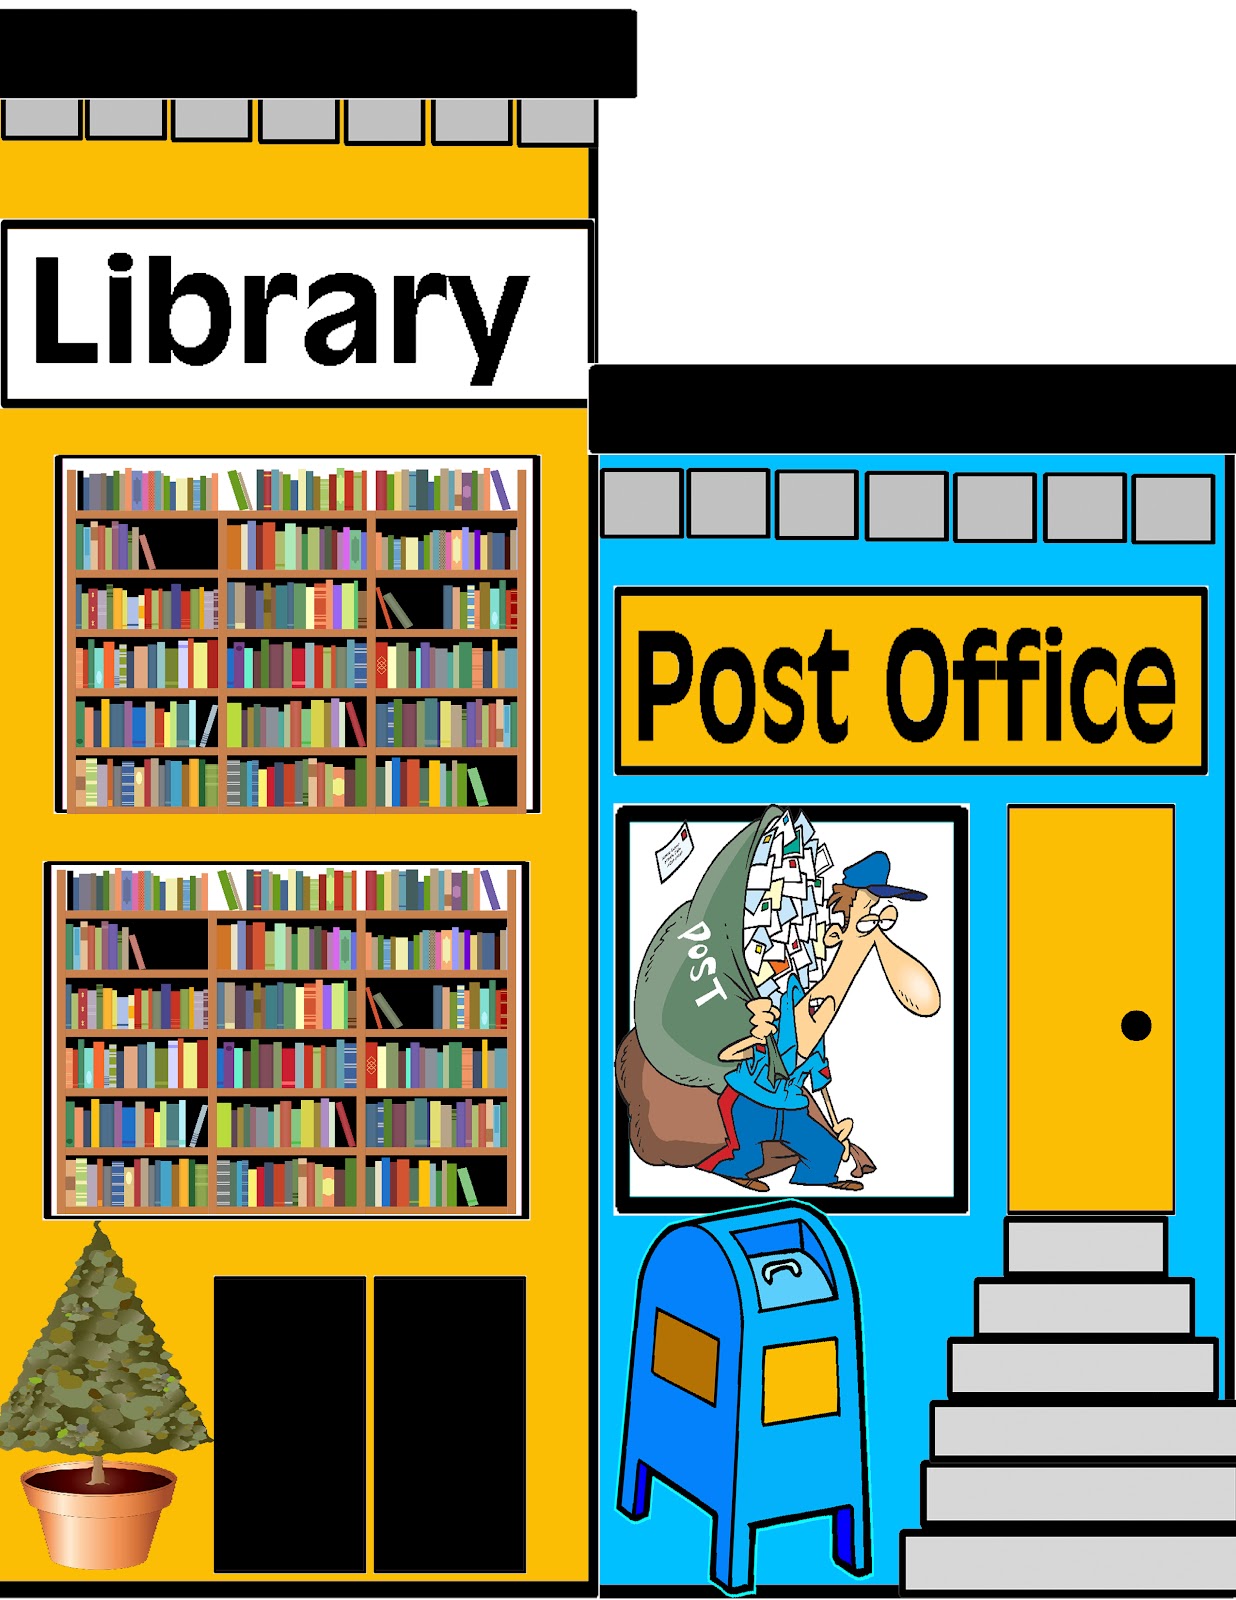 ms office clipart library - photo #45